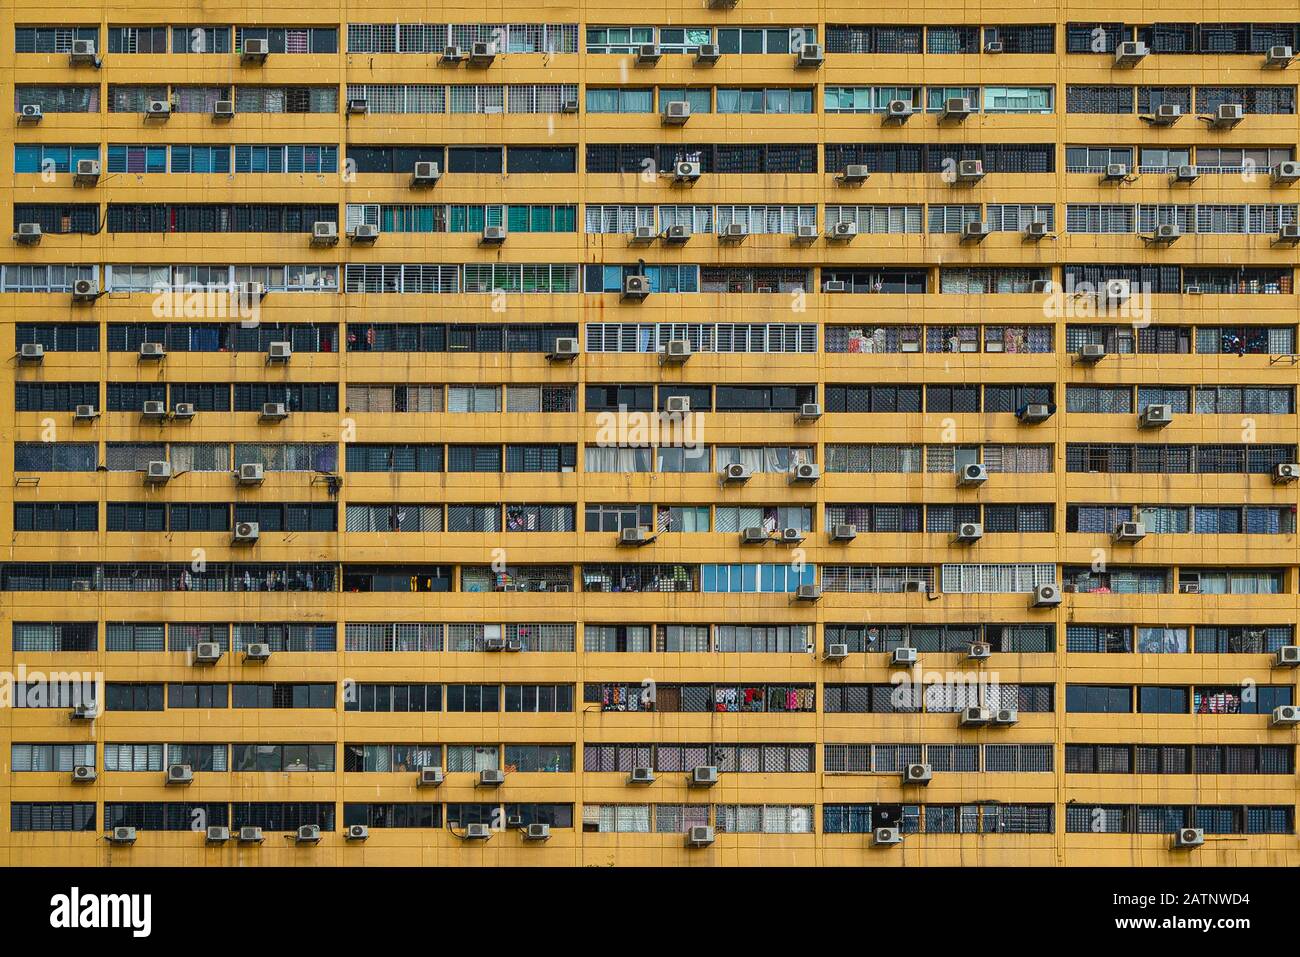 Singapore. January 2020.   A view of  an old skyscraper in Chinatown neighboorhood Stock Photo